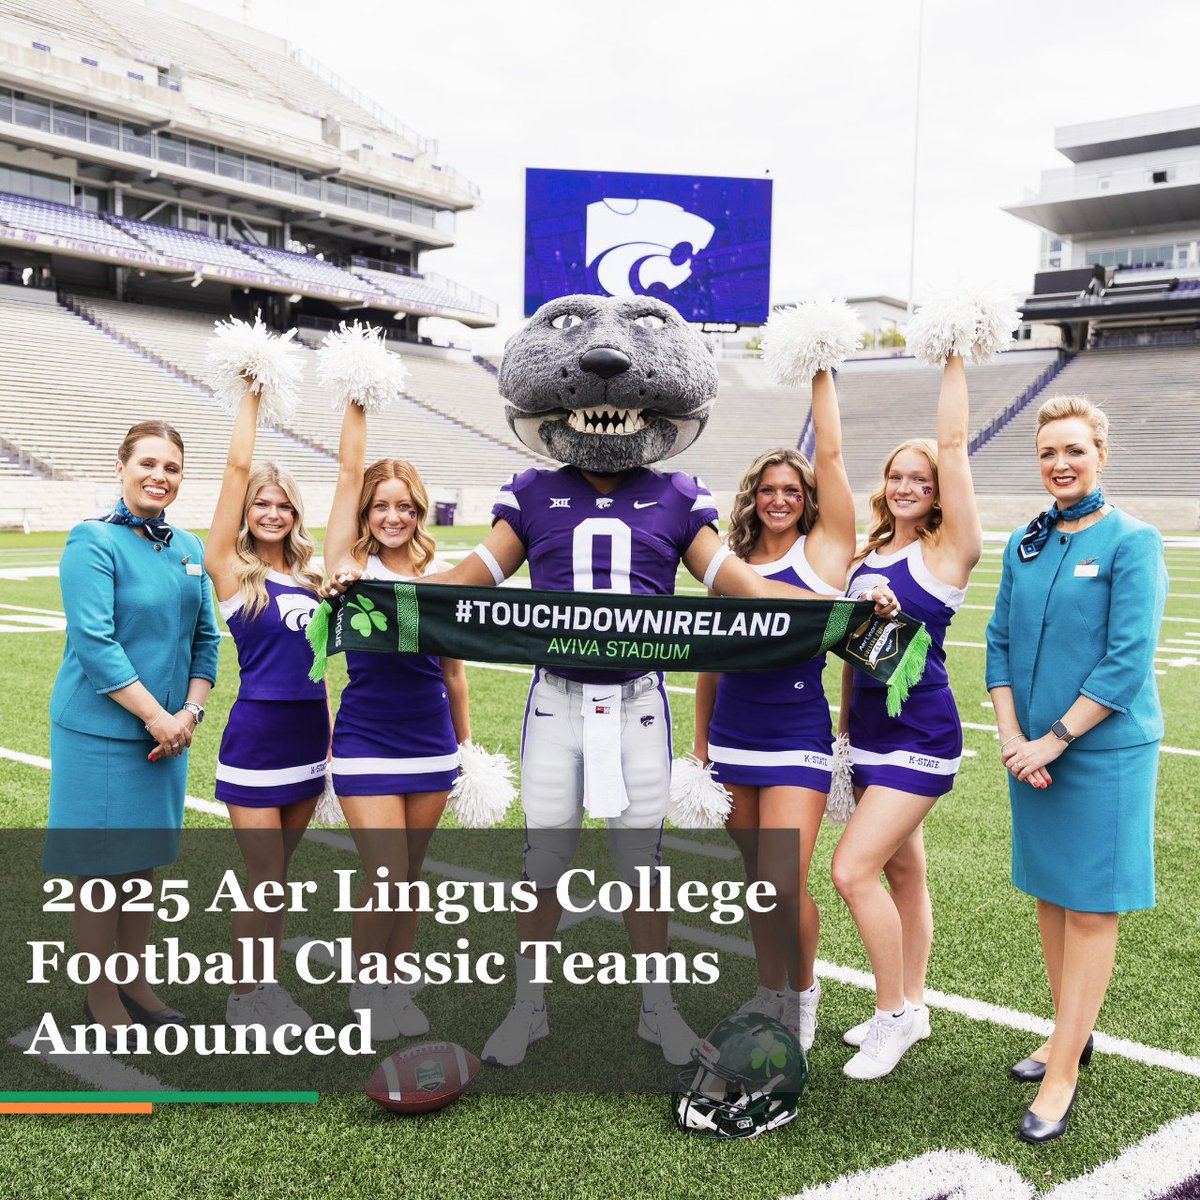 The 2025 Aer Lingus College Football Classic teams have been announced, with Kansas State taking on Iowa State in Dublin.

This marks the first-ever Big 12 match-up in Ireland. 🍀

collegefootballireland.com/games/k-state-…

#AISLC #AmericanIrish #TouchdownDublin